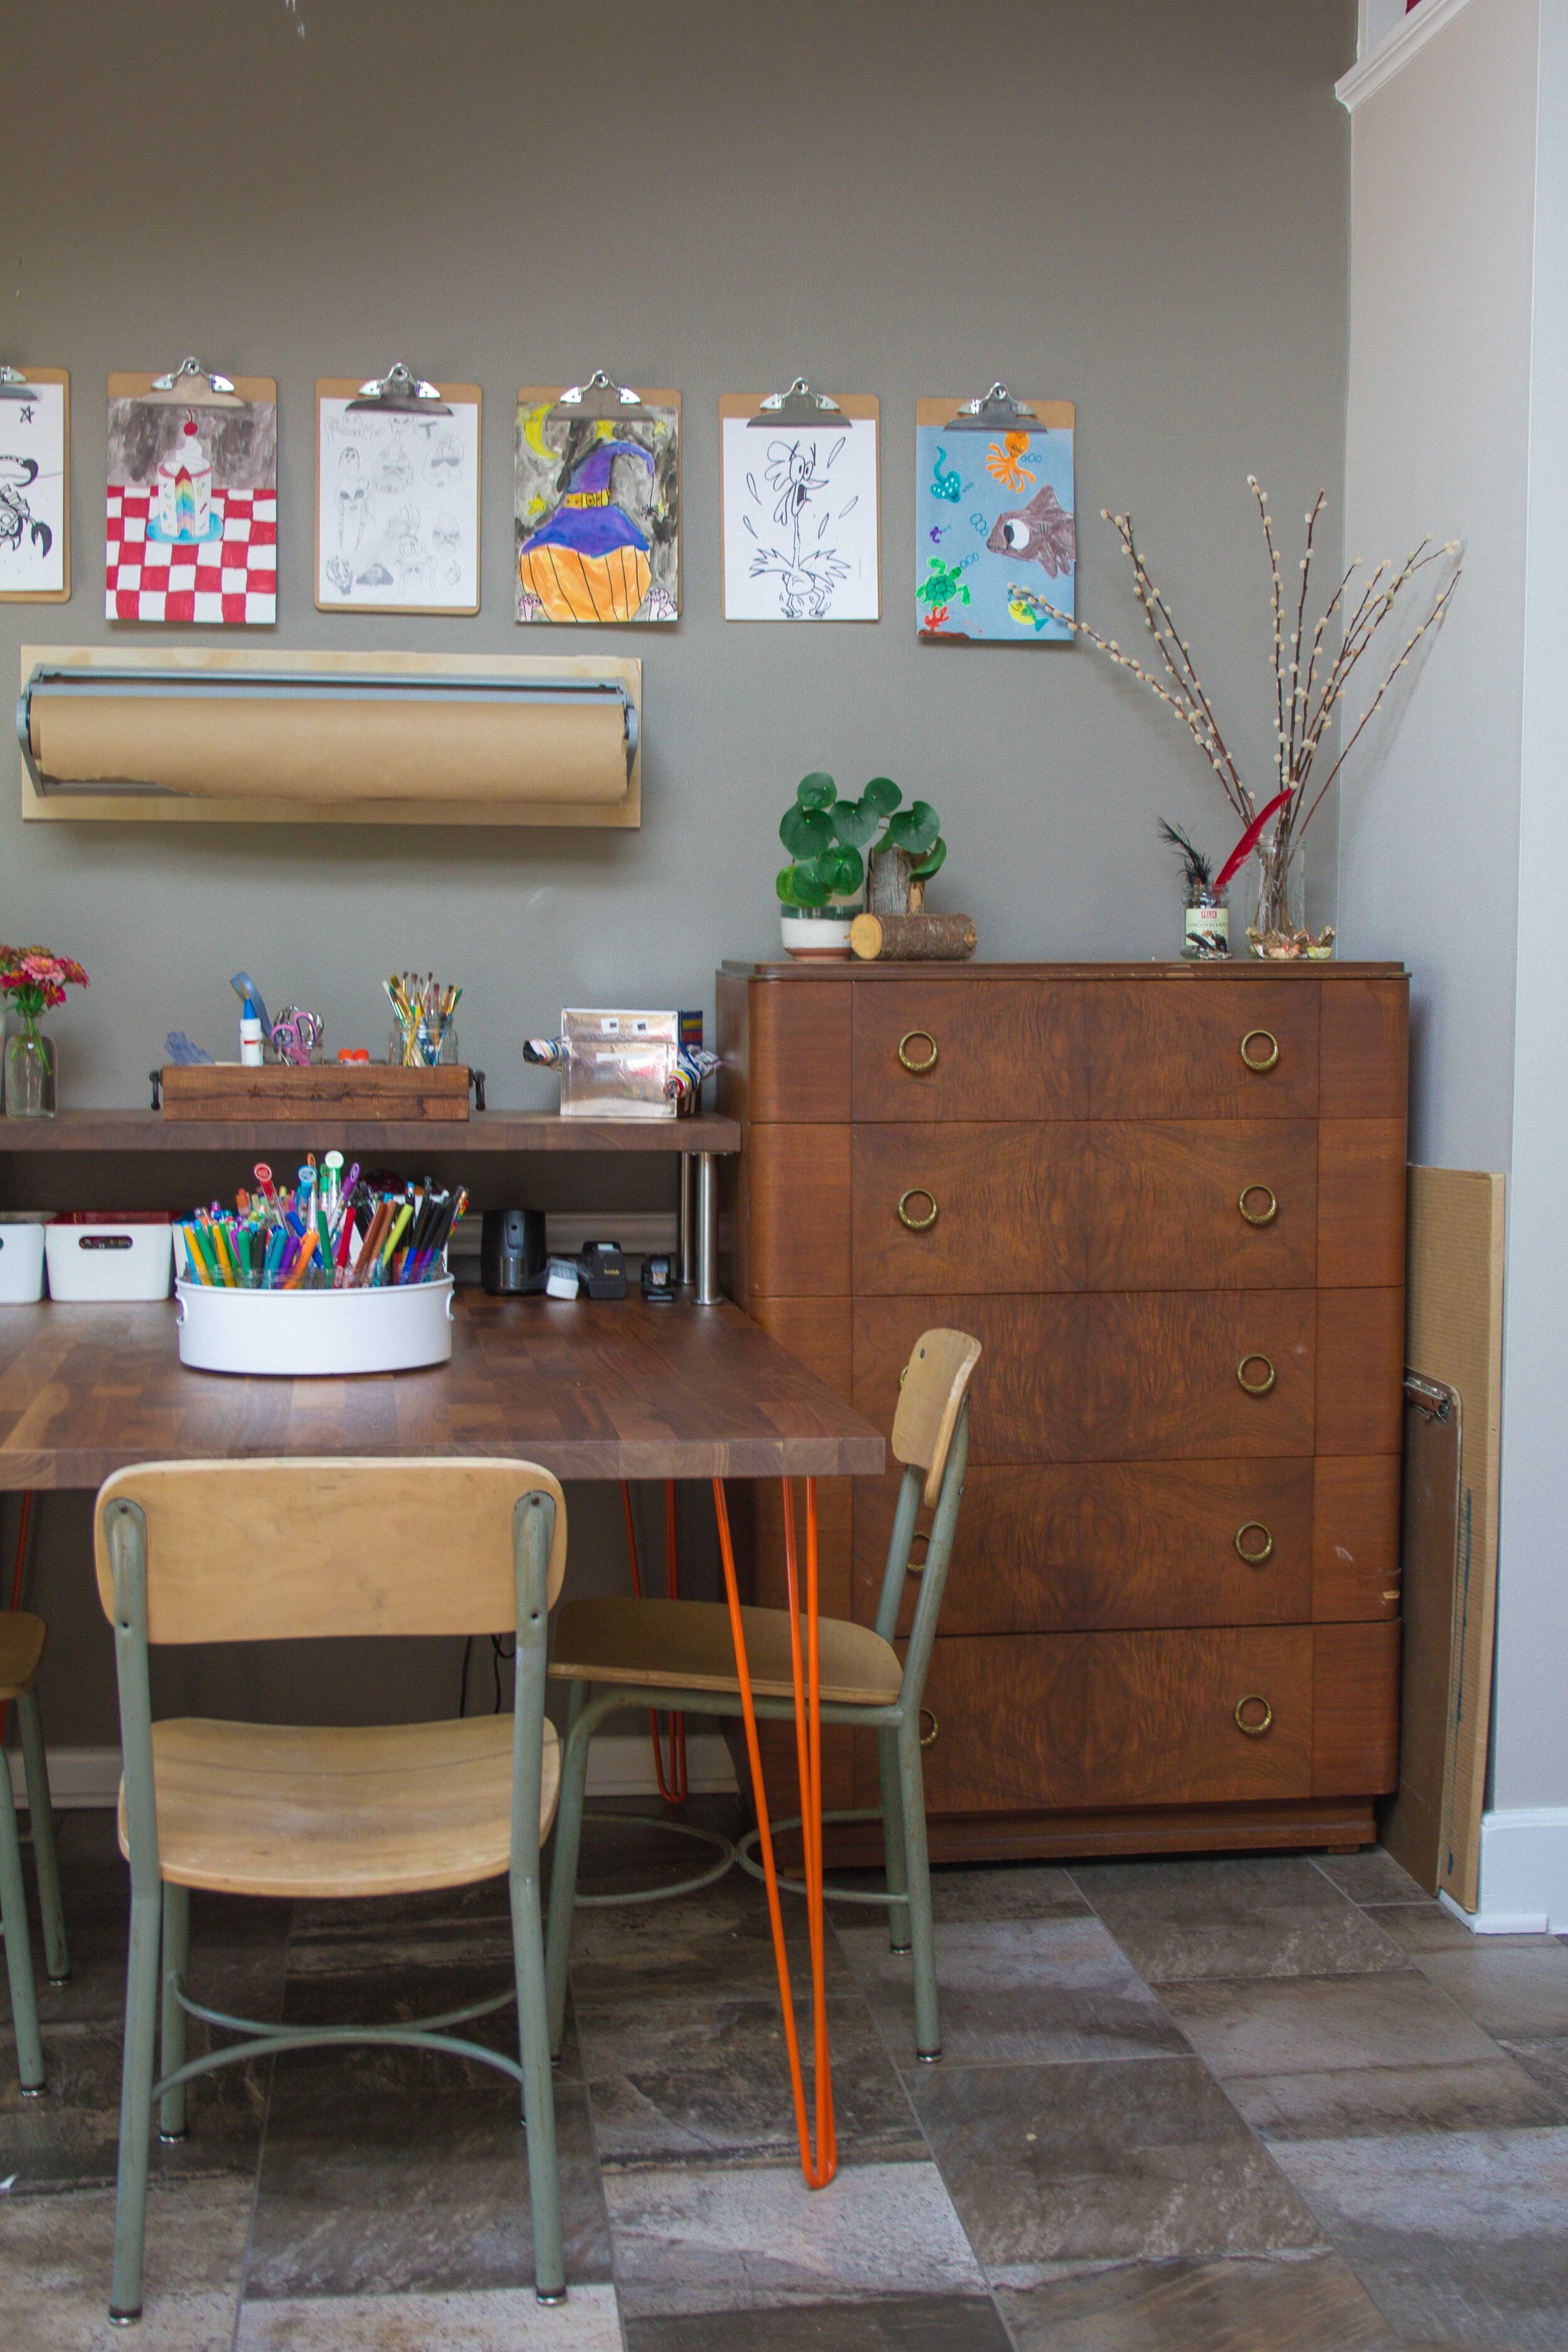 Home art studio ideas – an opportunity to break the rules of design